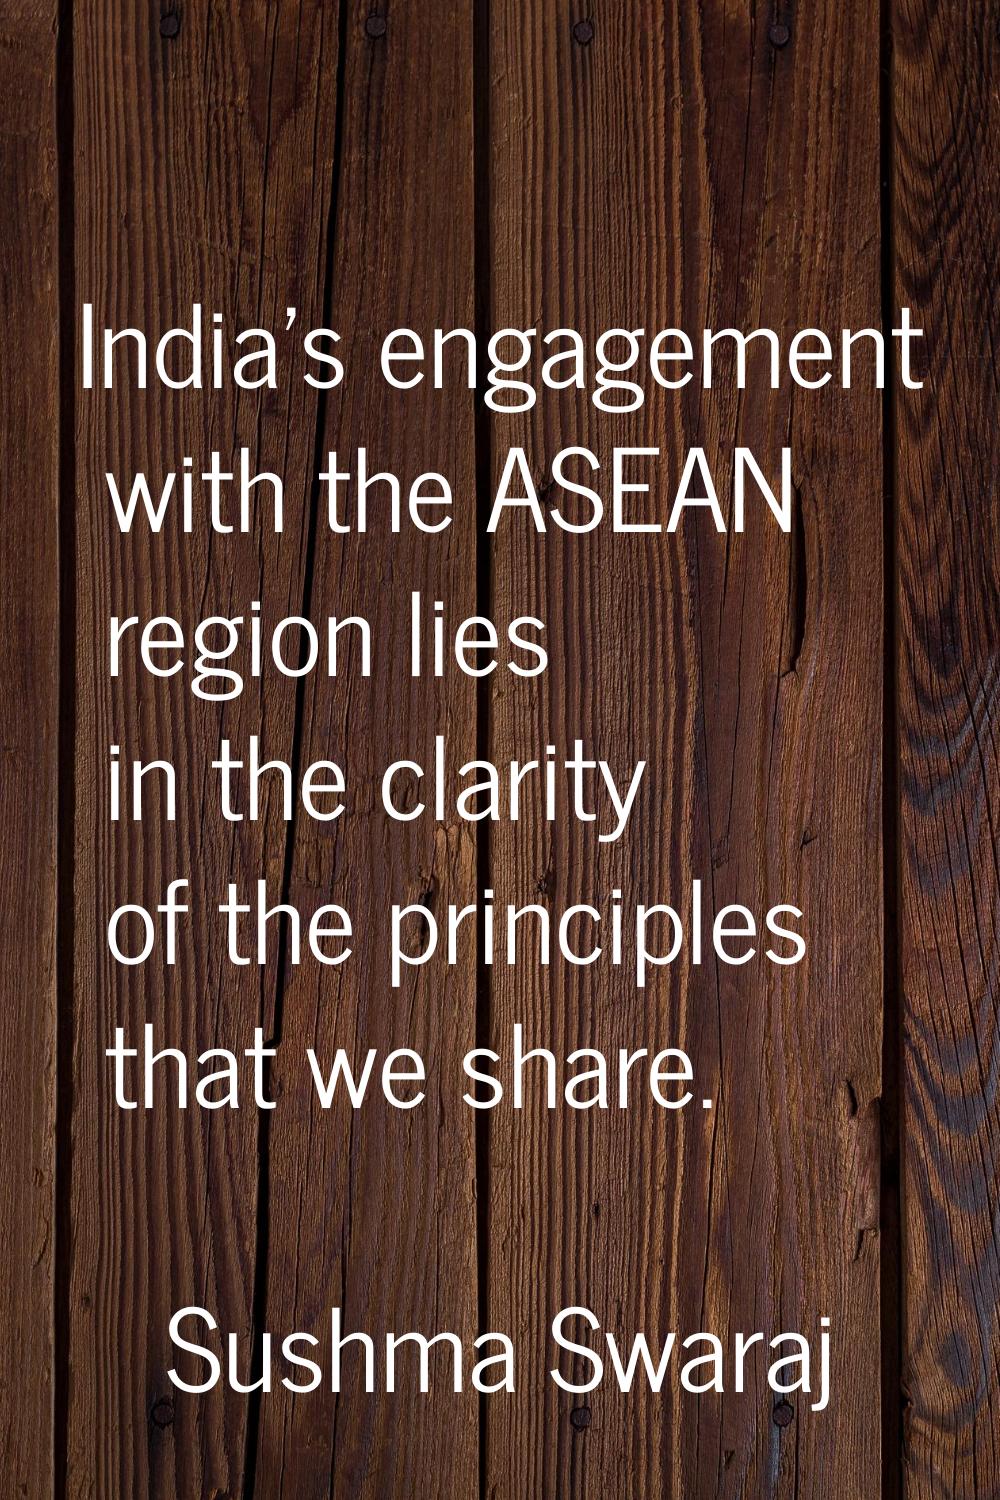 India's engagement with the ASEAN region lies in the clarity of the principles that we share.